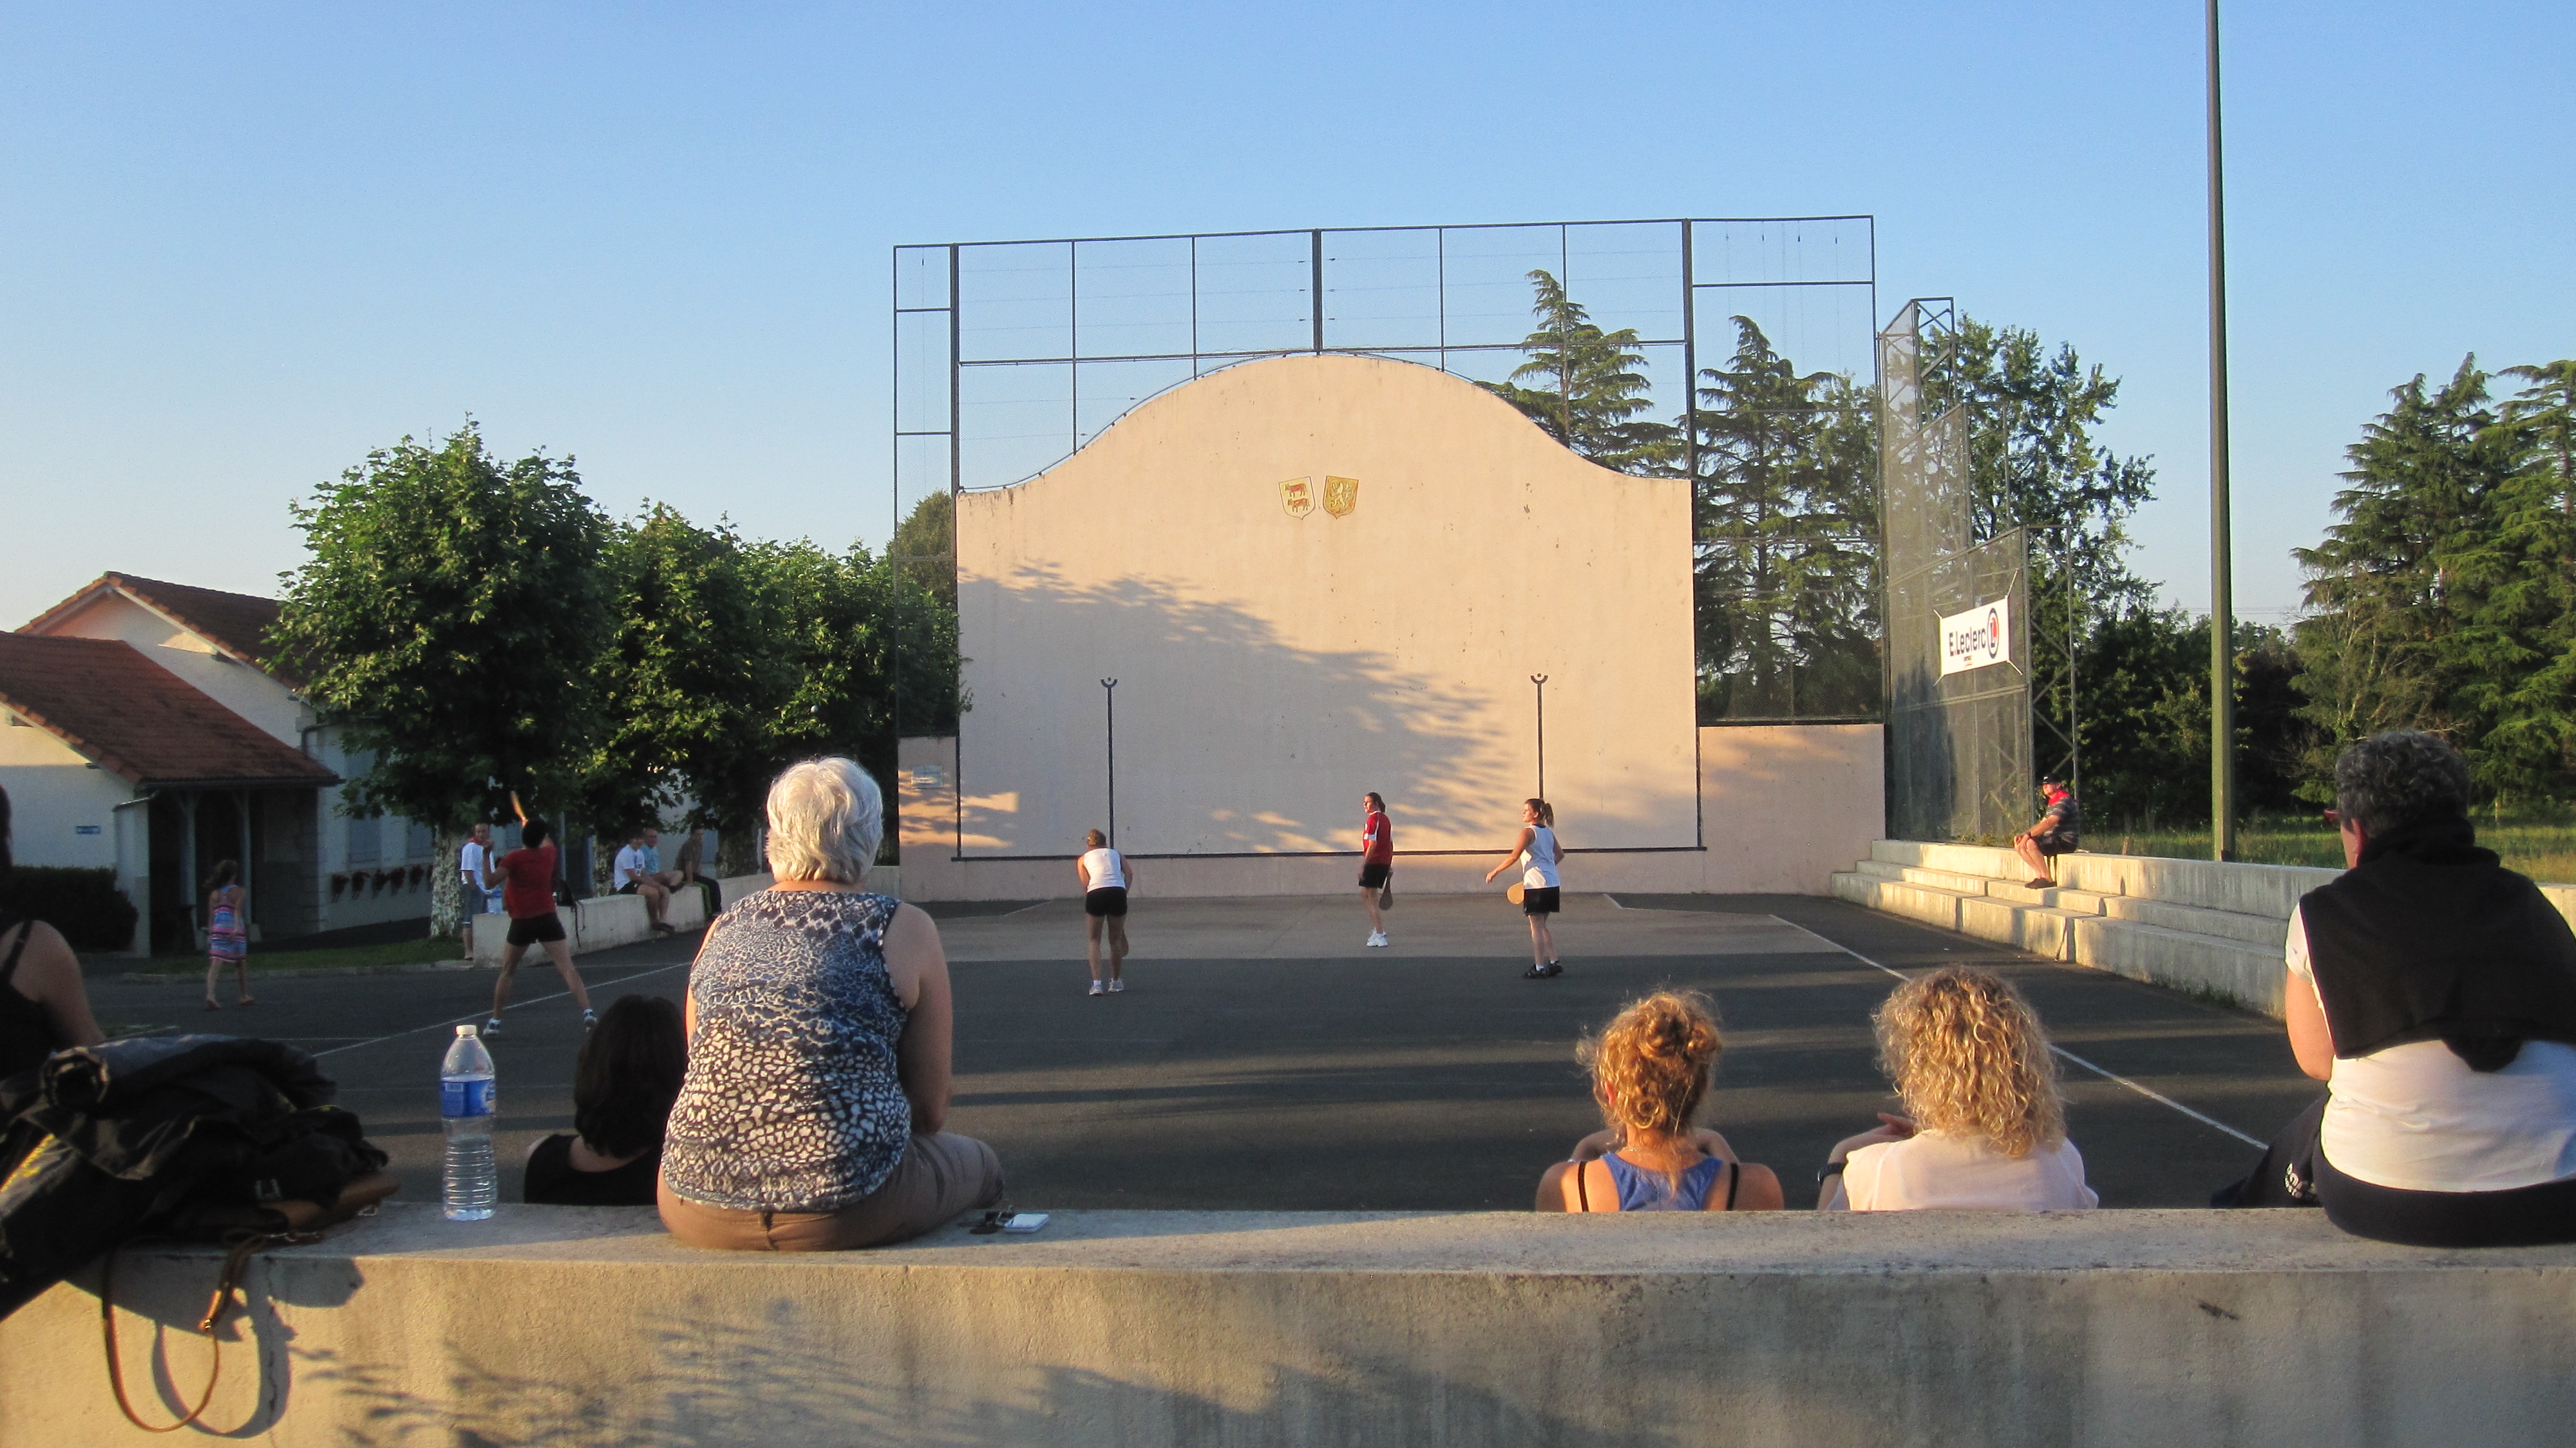 The high wall called Fronton where the Basque ball game Pelota is played